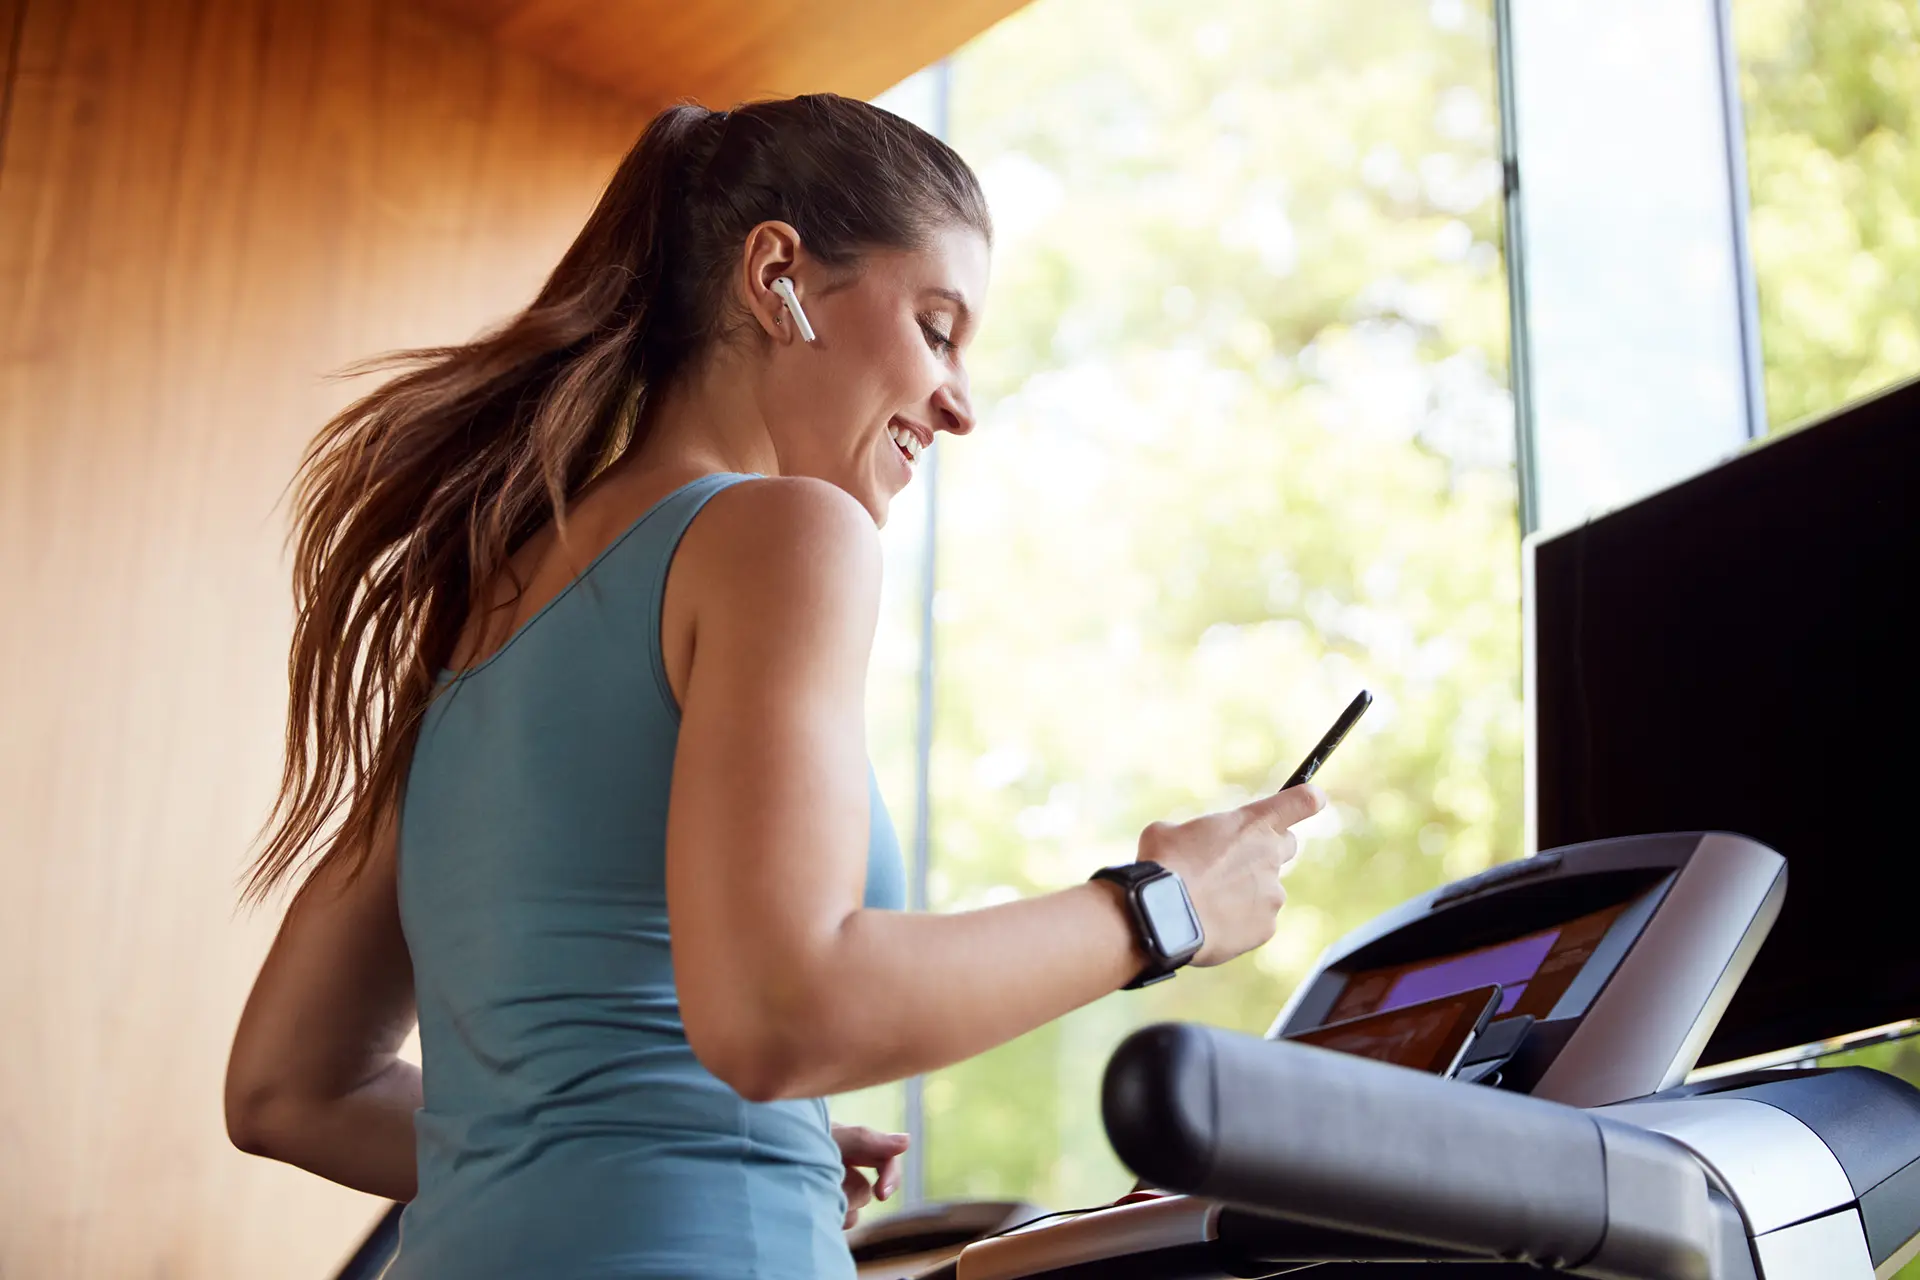 Woman looking at smartphone while running on a treadmill